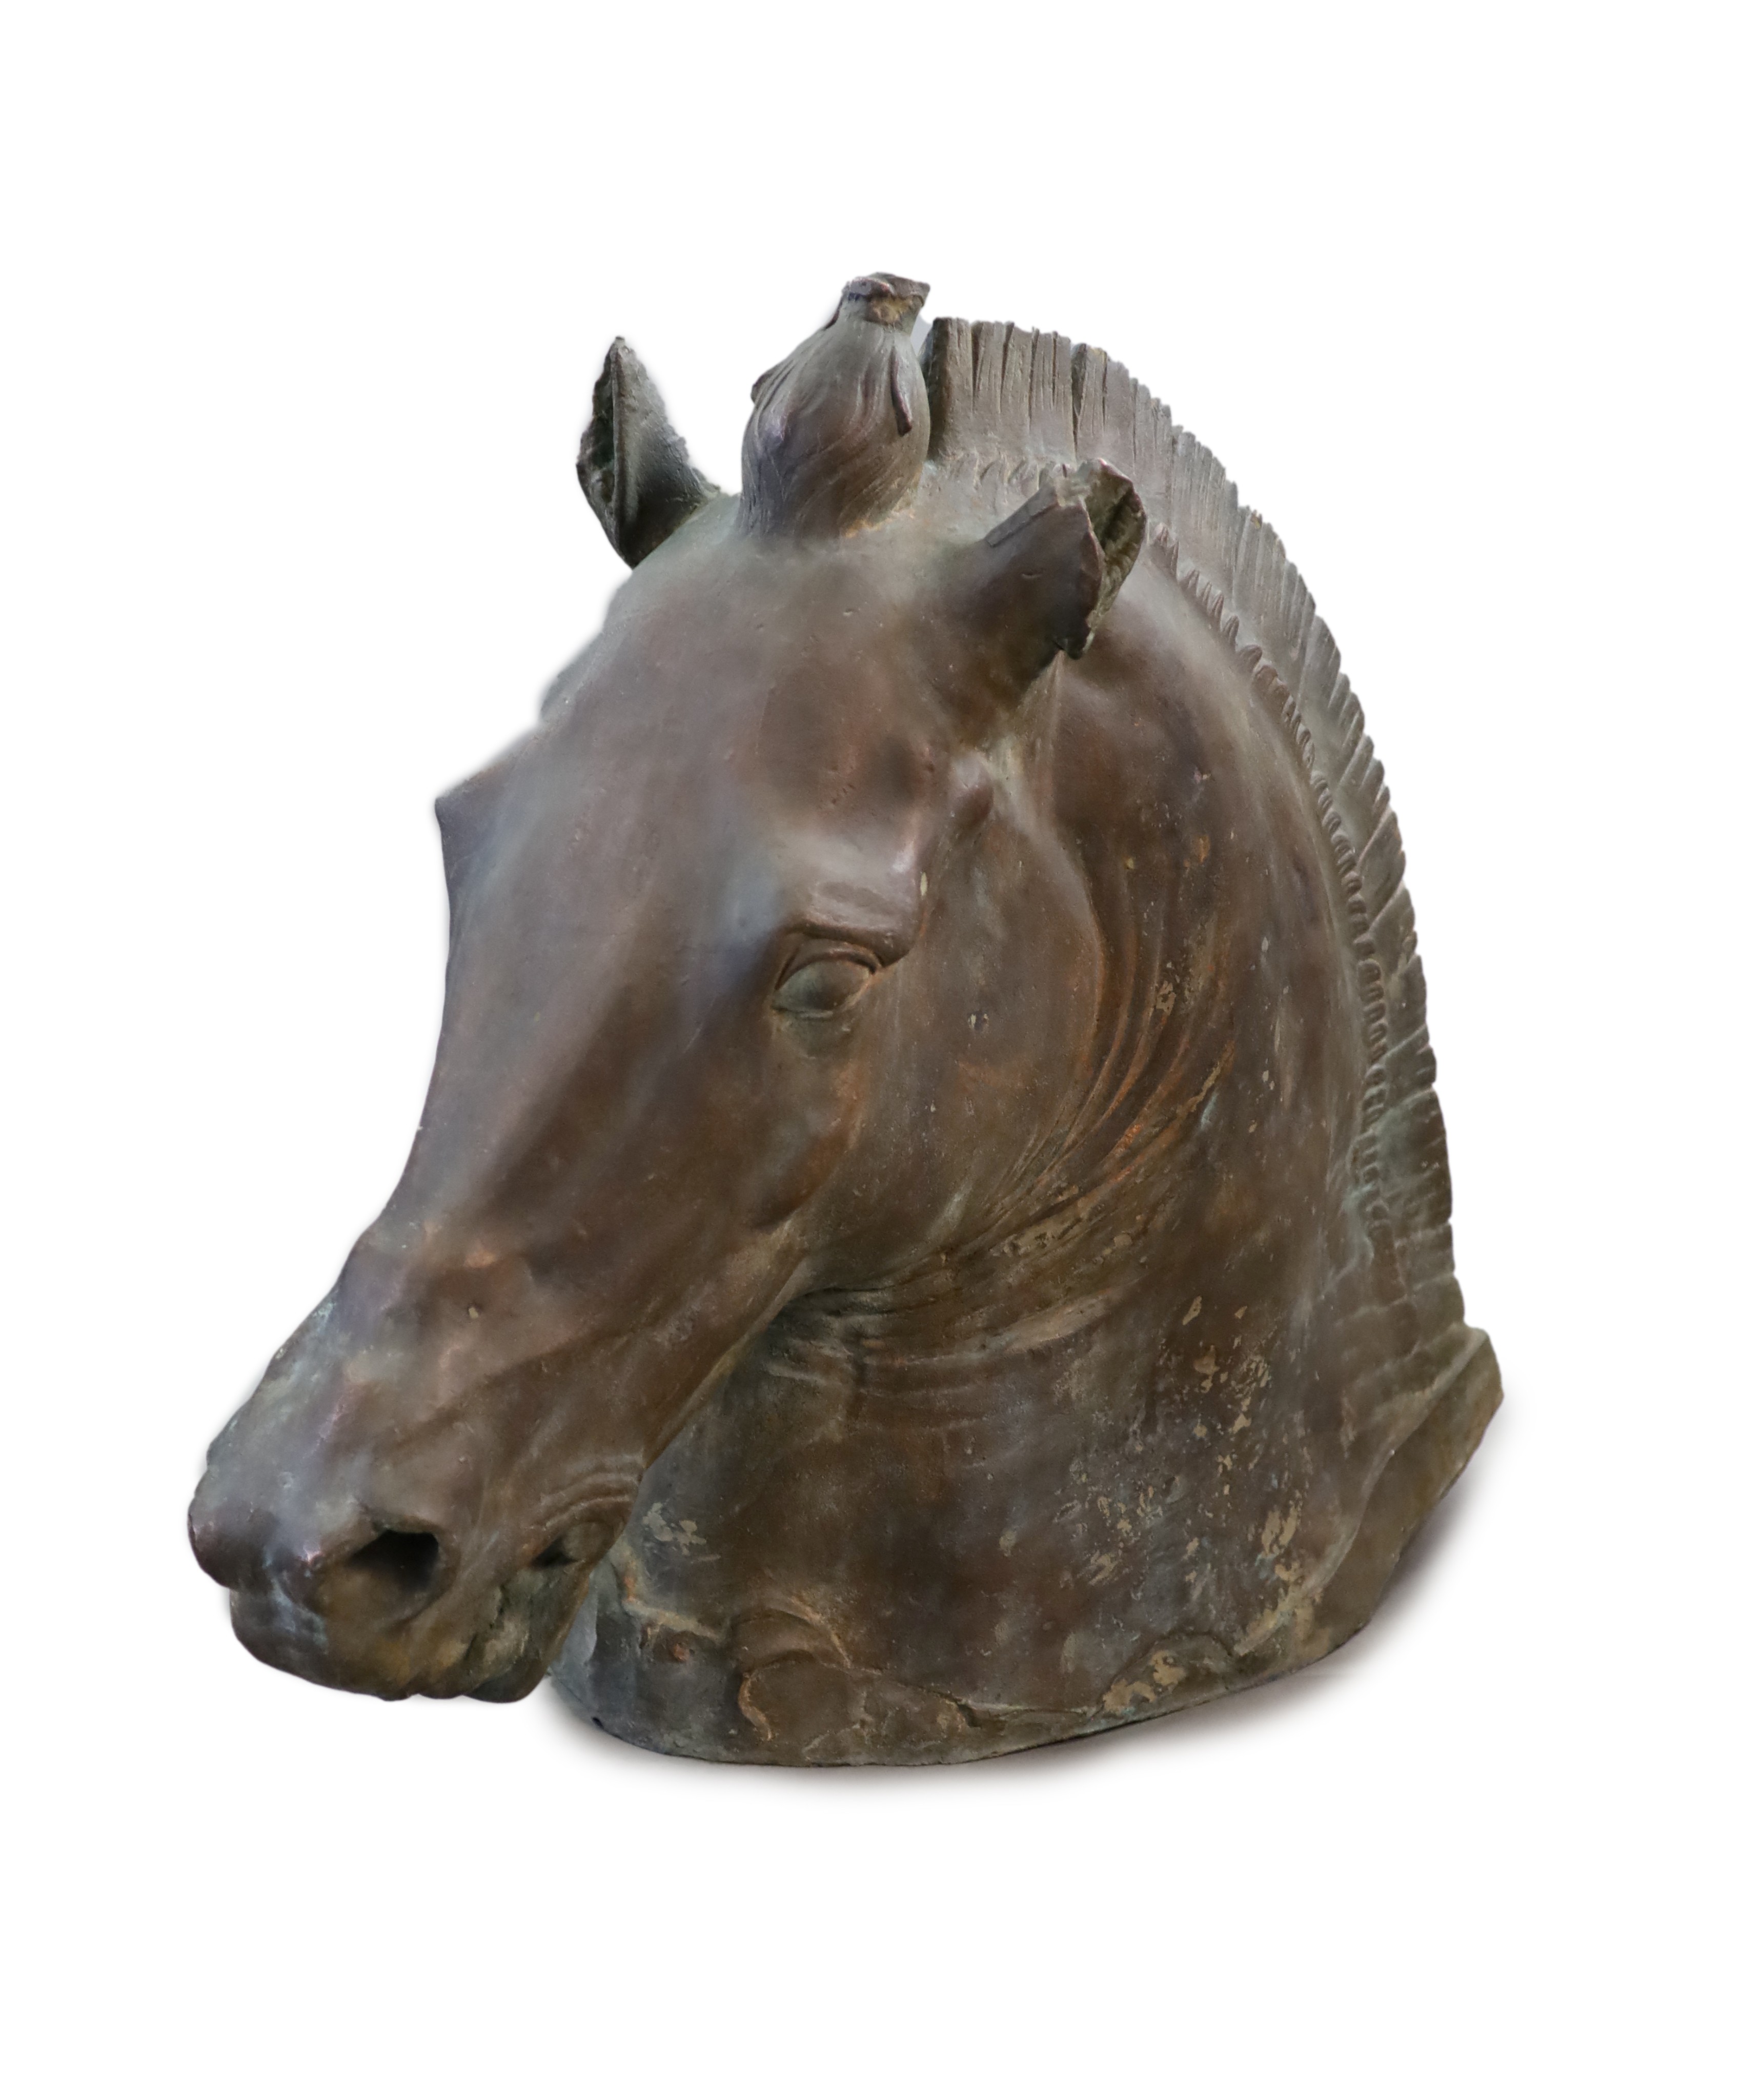 A large and impressive full-size bronze model after the Medici Riccardi horse’s head, 20th century, 97cm long, 80cm high